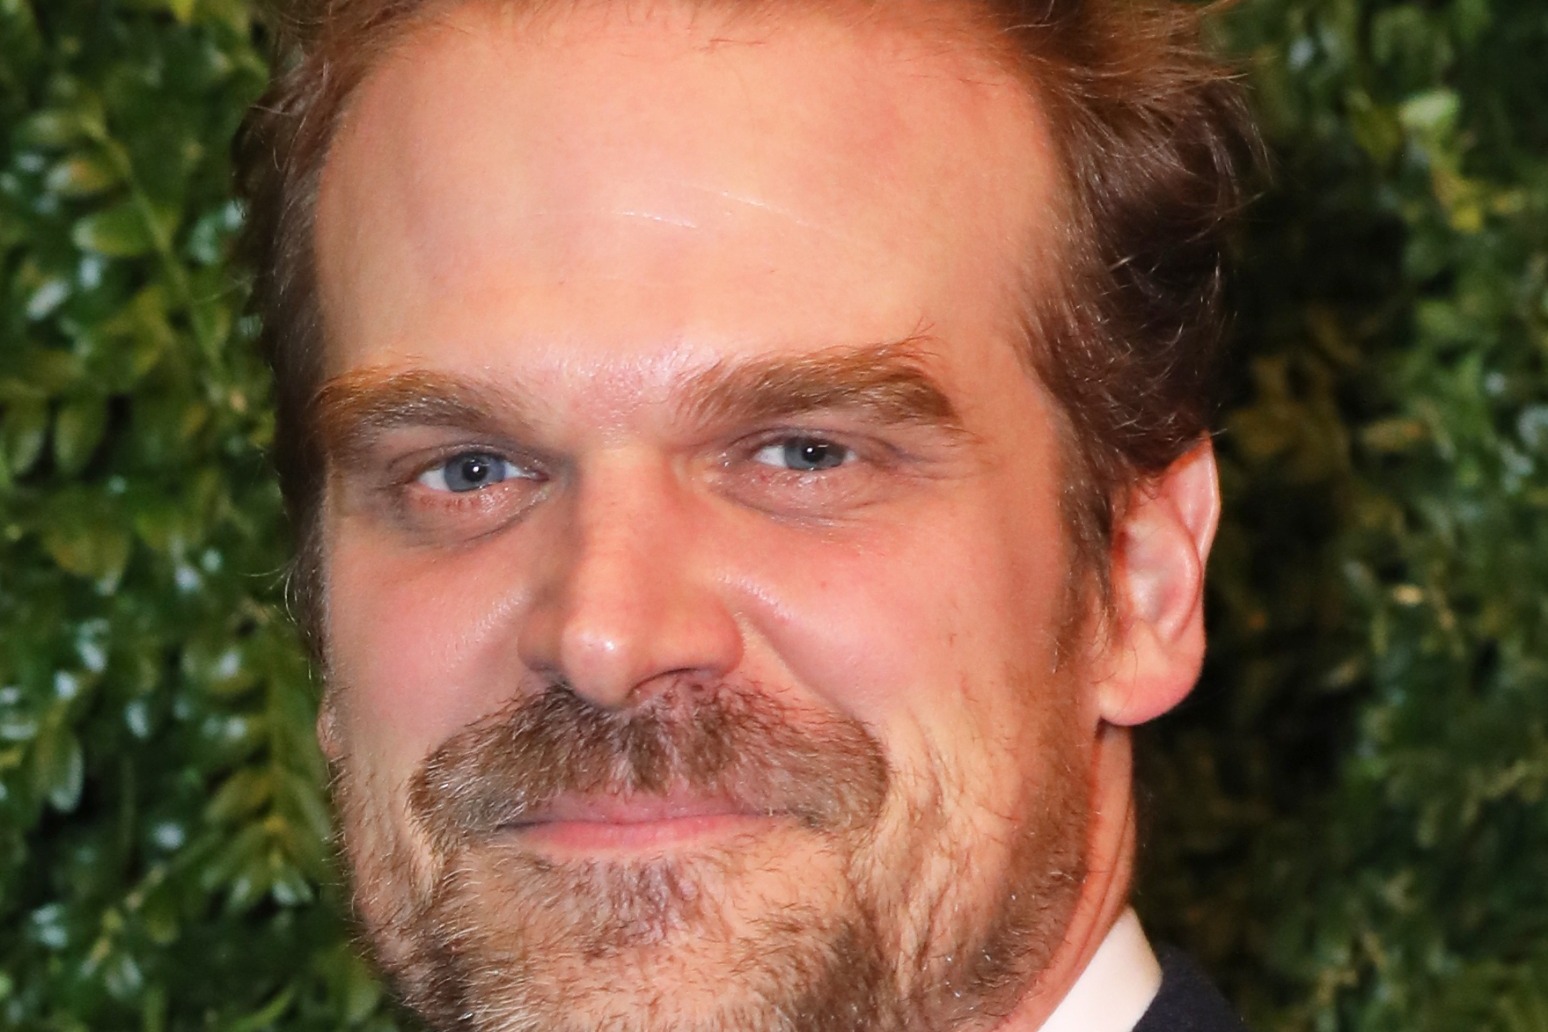 David Harbour reflects on mental illness and finding fame later in life 